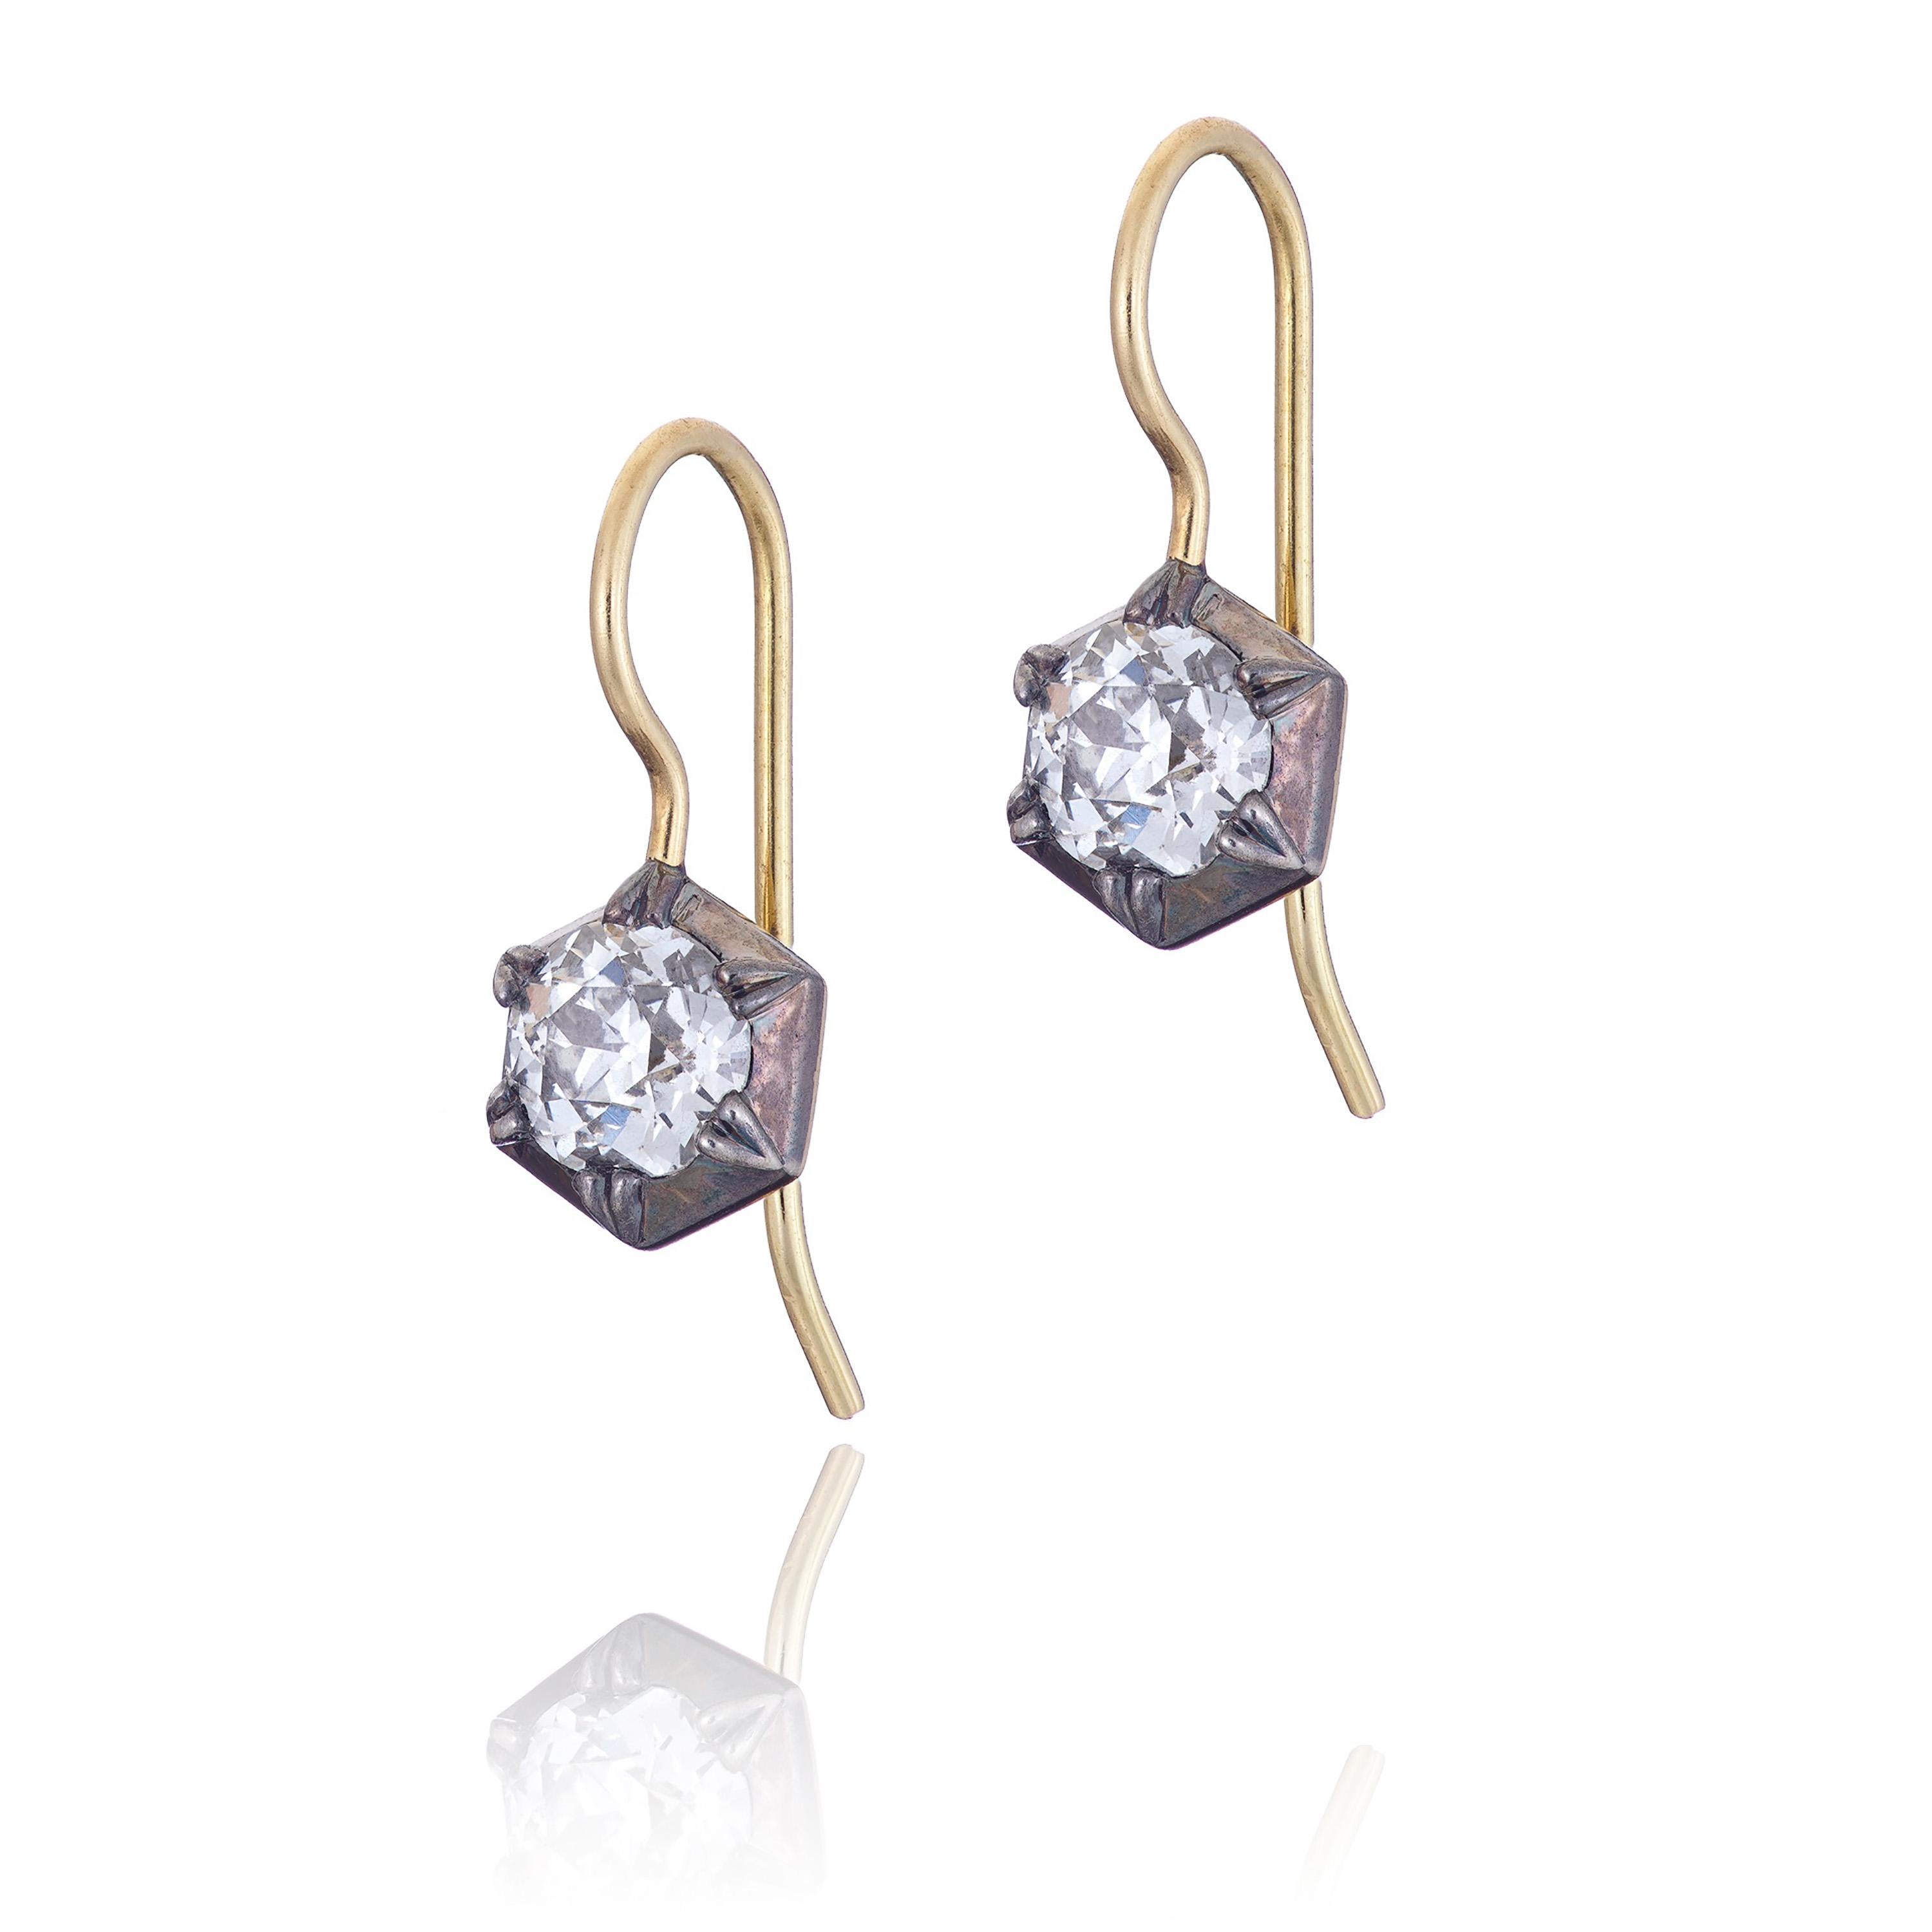 A one off pair of diamond earrings created using two matching old mine cut diamonds (1.28ct F VS). The Georgian cut down style highlights these unique diamonds which are full of character due to being cut totally by hand without the use of modern